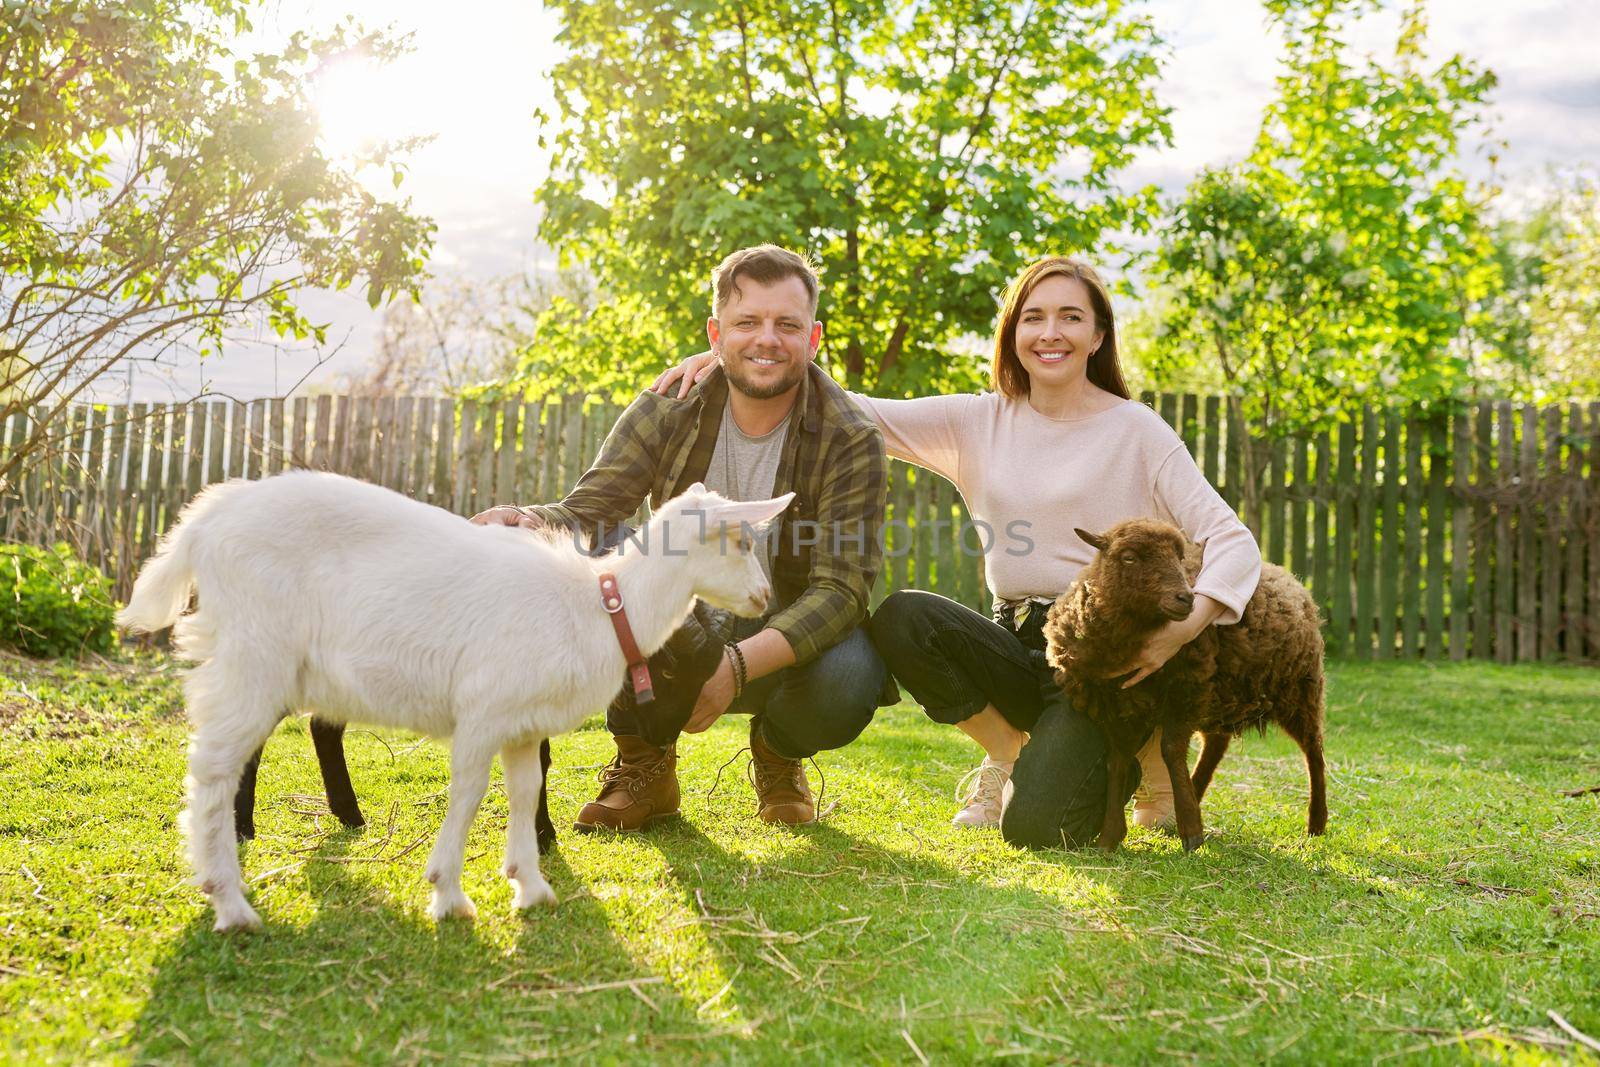 Small farm with ouessant sheep and goat, portrait of family couple of farm owners with animals, eco tourism, countryside, rural scene, domestic animals